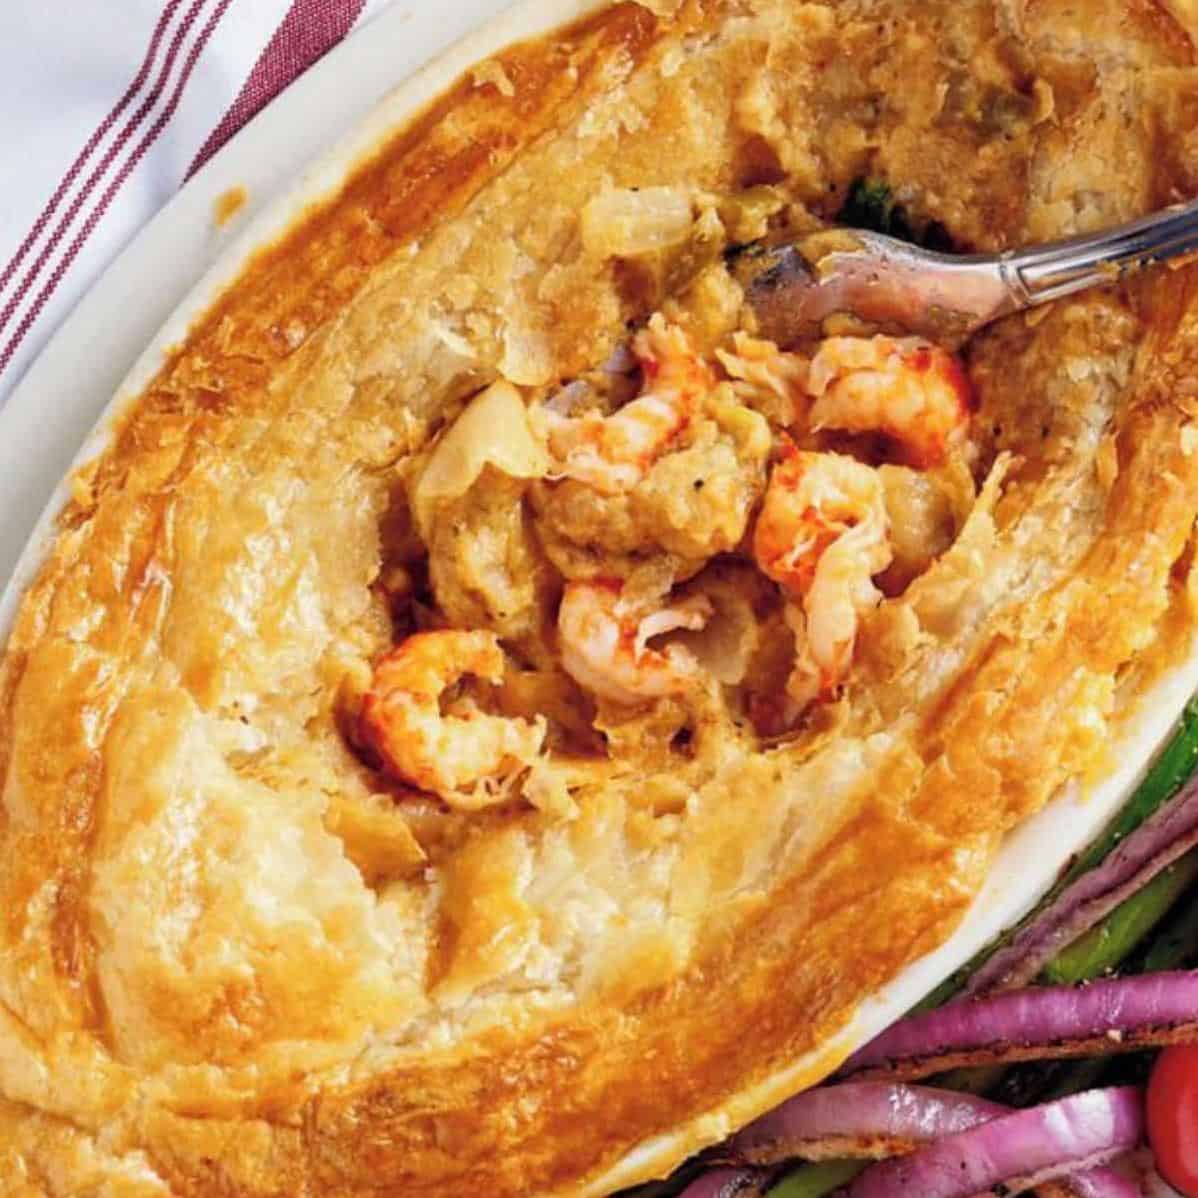  One bite of this pie will transport you to the bayou.